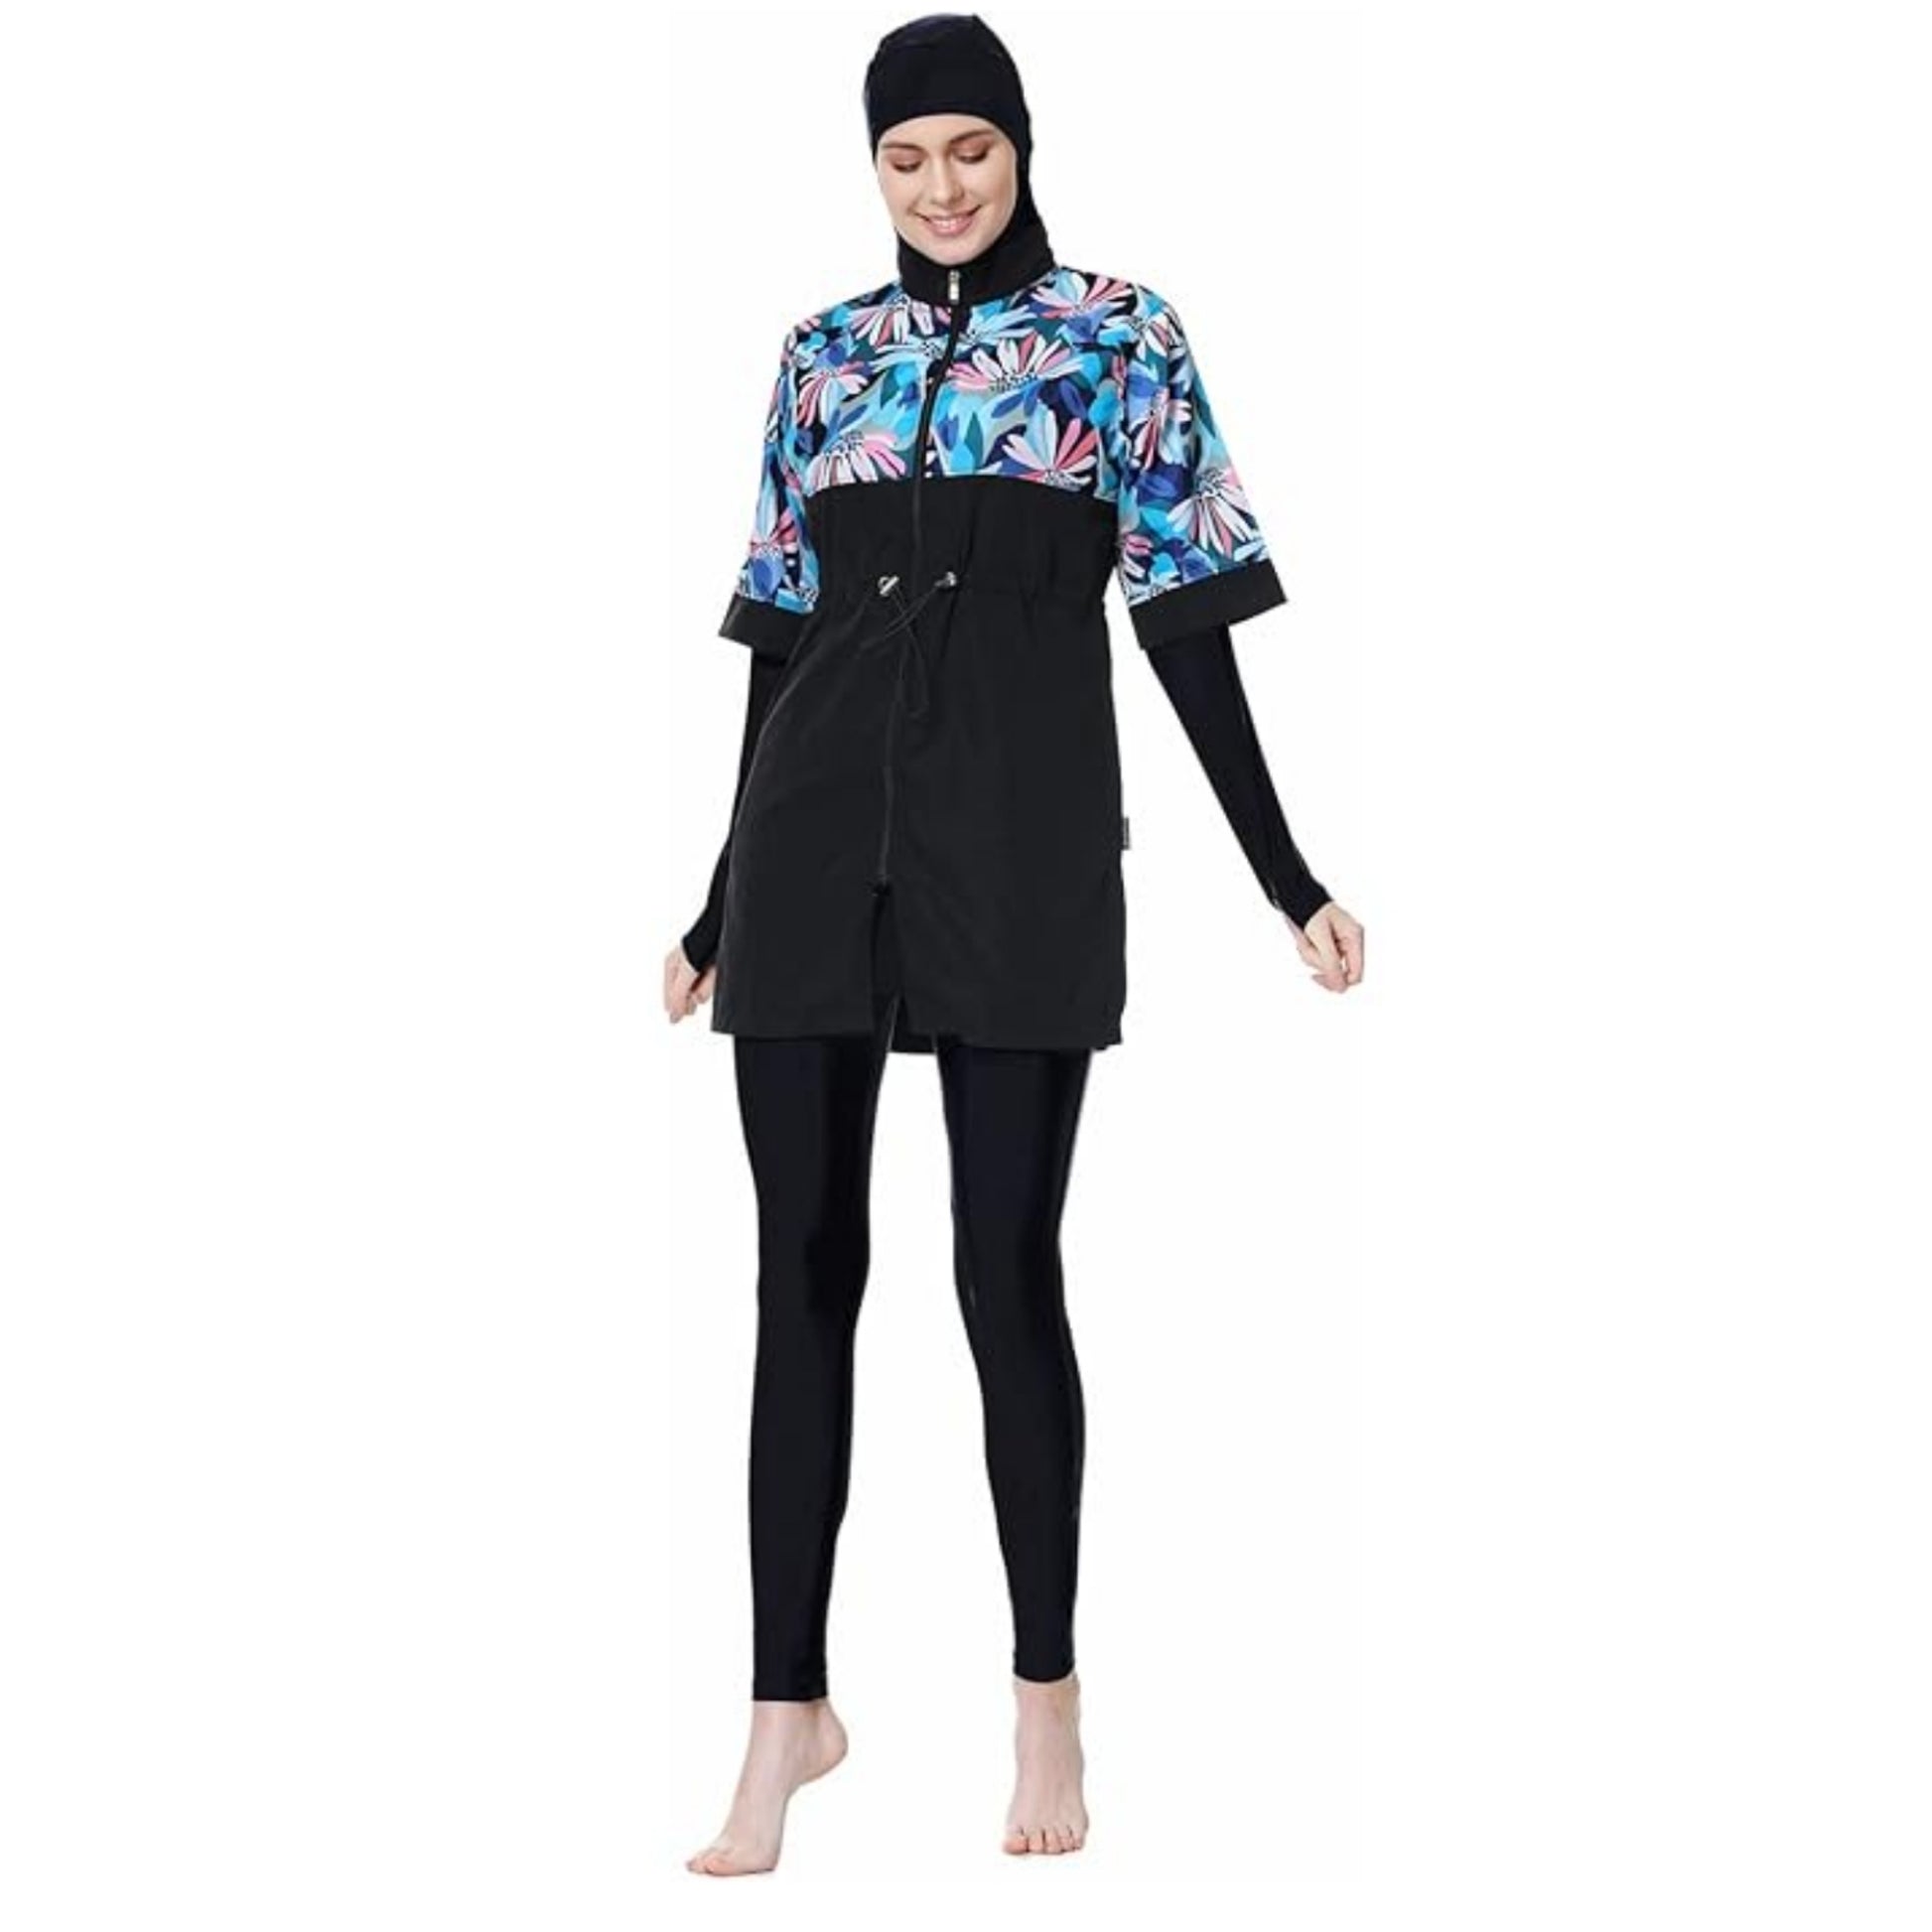 Dive into sophistication with our Black Burkini Modest 3Pcs Set at Hikmah Boutique. Experience full coverage and style with the attached hijab cap, long top, loose outer top, and pants. Unleash confidence in all sizes, at a reasonable price, and indulge in premium quality swimwear. Elevate your modest beach look today!